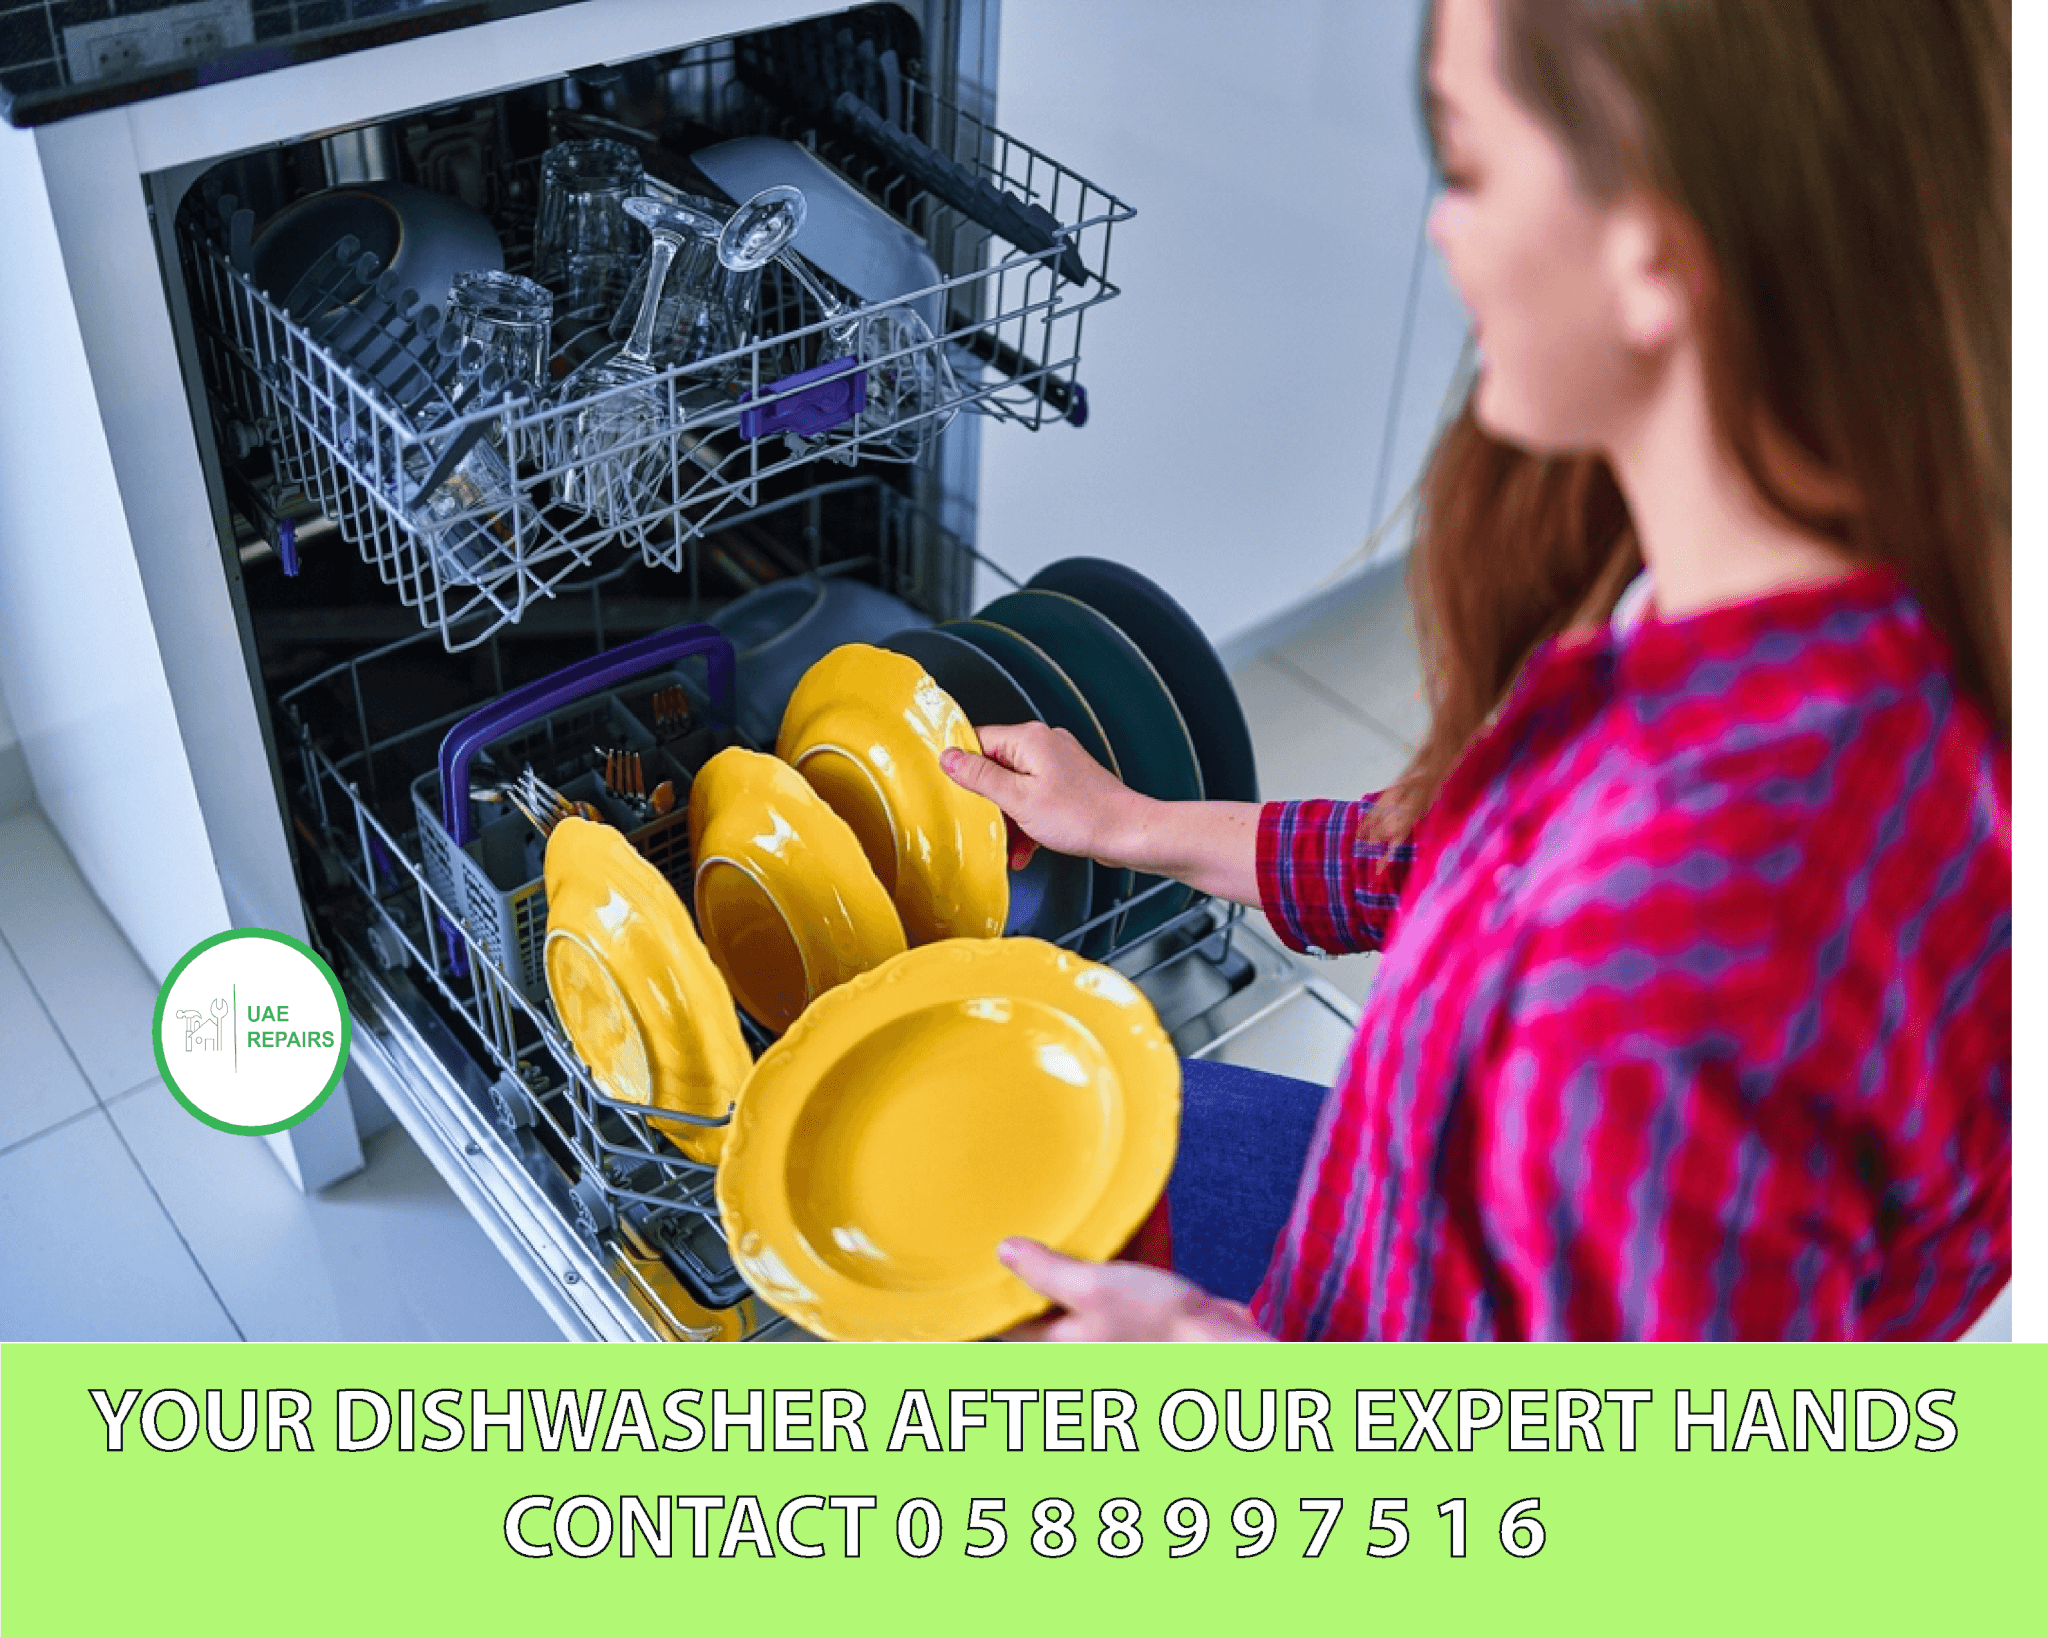 UAE REPAIRS Your Dishwasher After Our Expert Hands